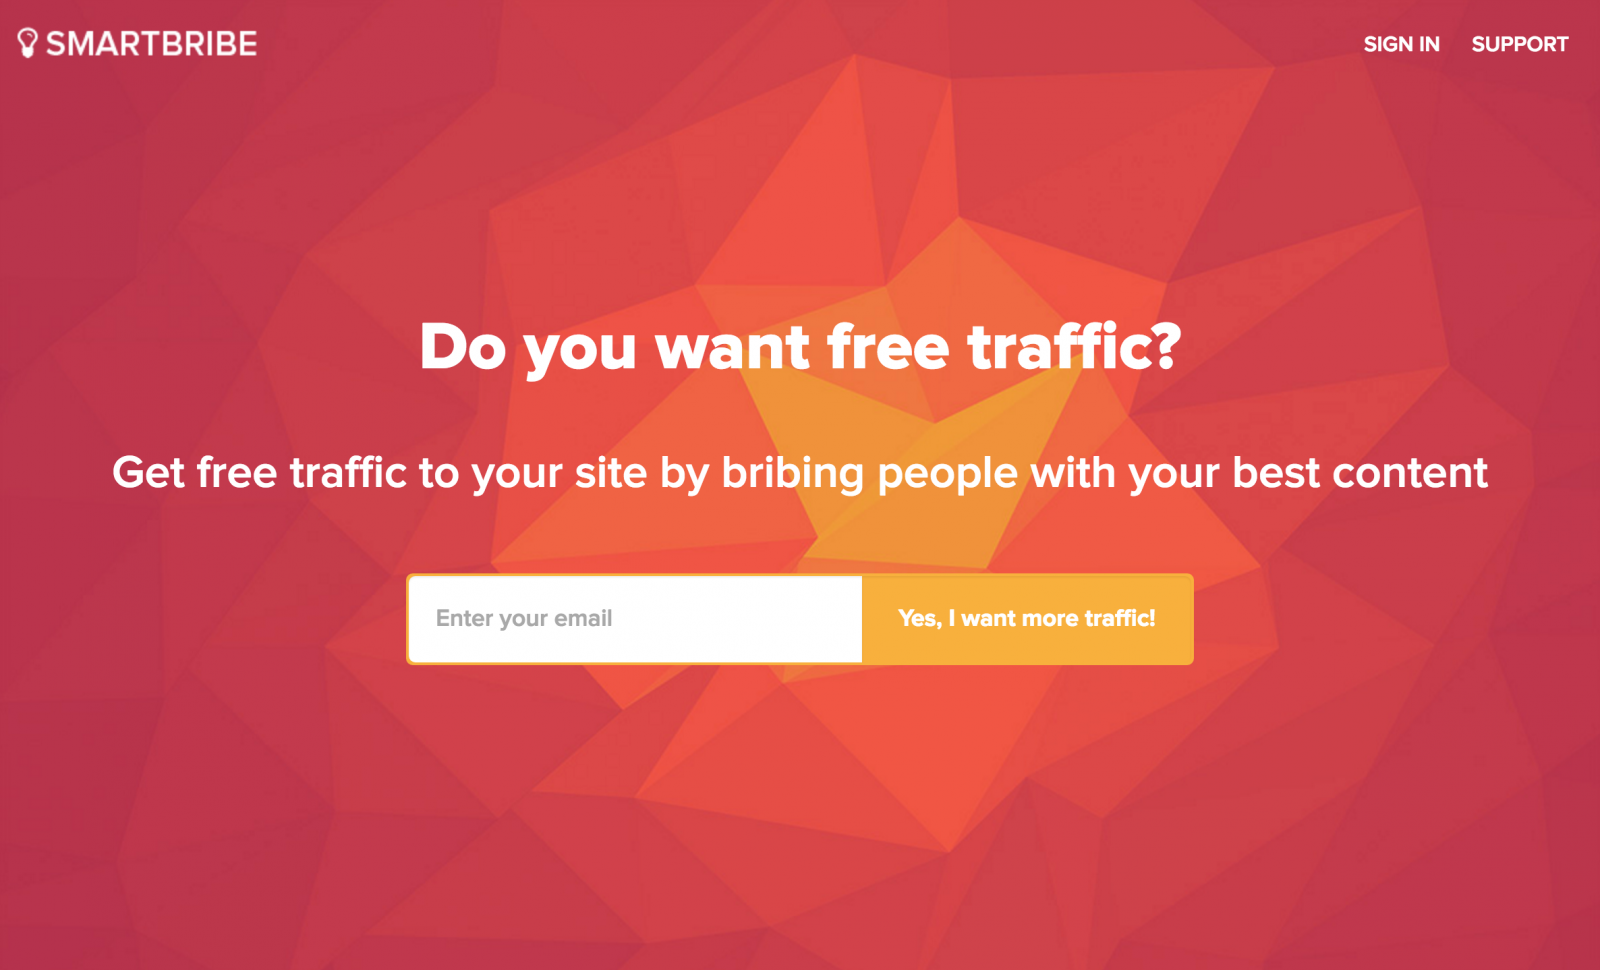 SmartBribe – Get free traffic to your site (turn one visitor into three)